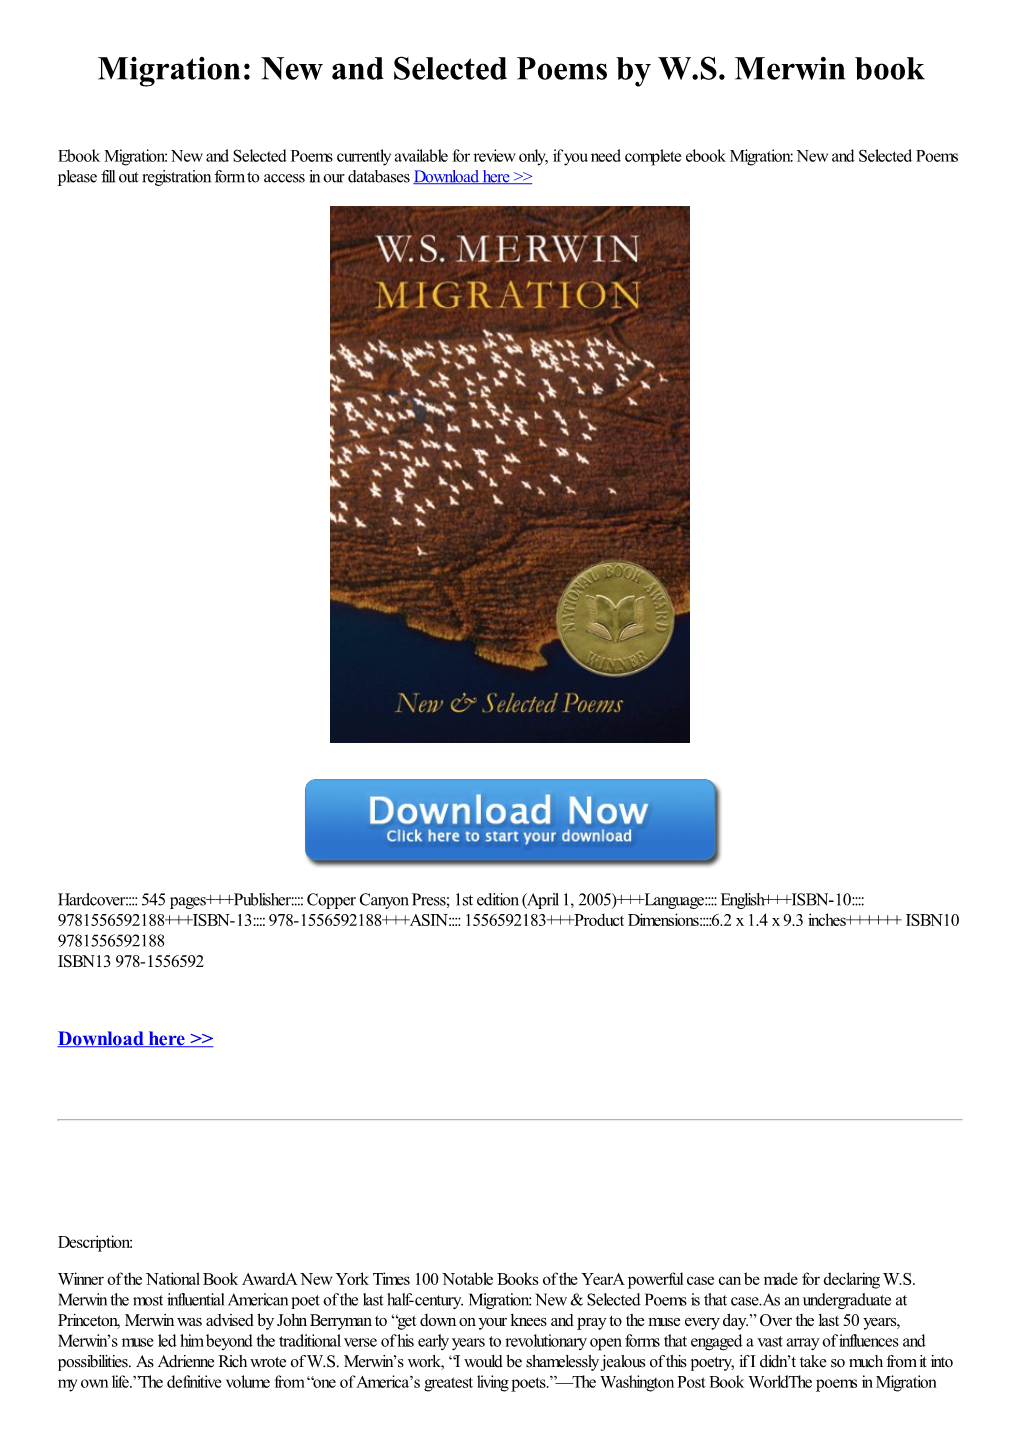 Migration: New and Selected Poems by W.S. Merwin Book